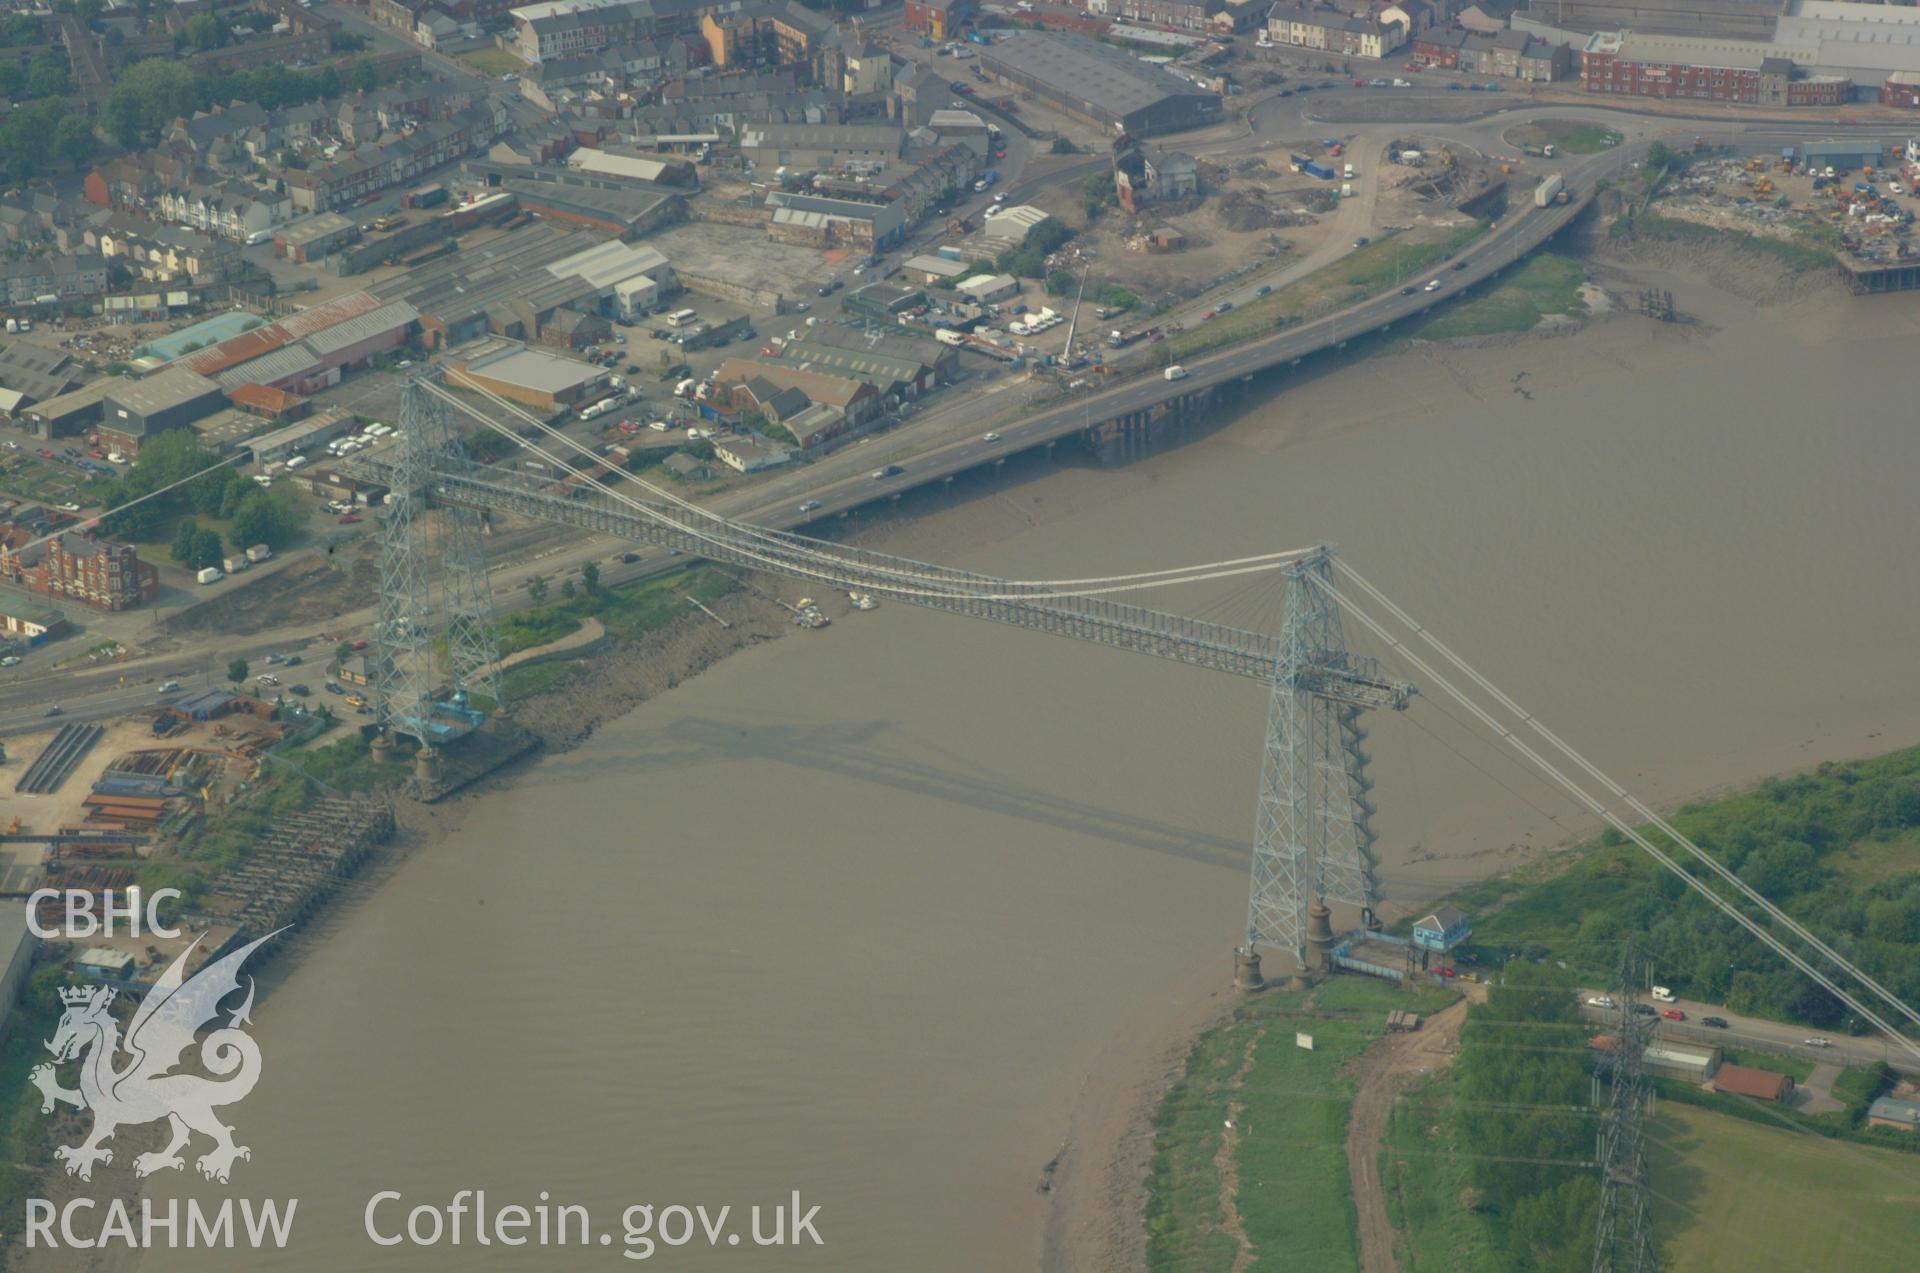 RCAHMW colour oblique aerial photograph of Newport Transporter Bridge, Newport taken on 26/05/2004 by Toby Driver